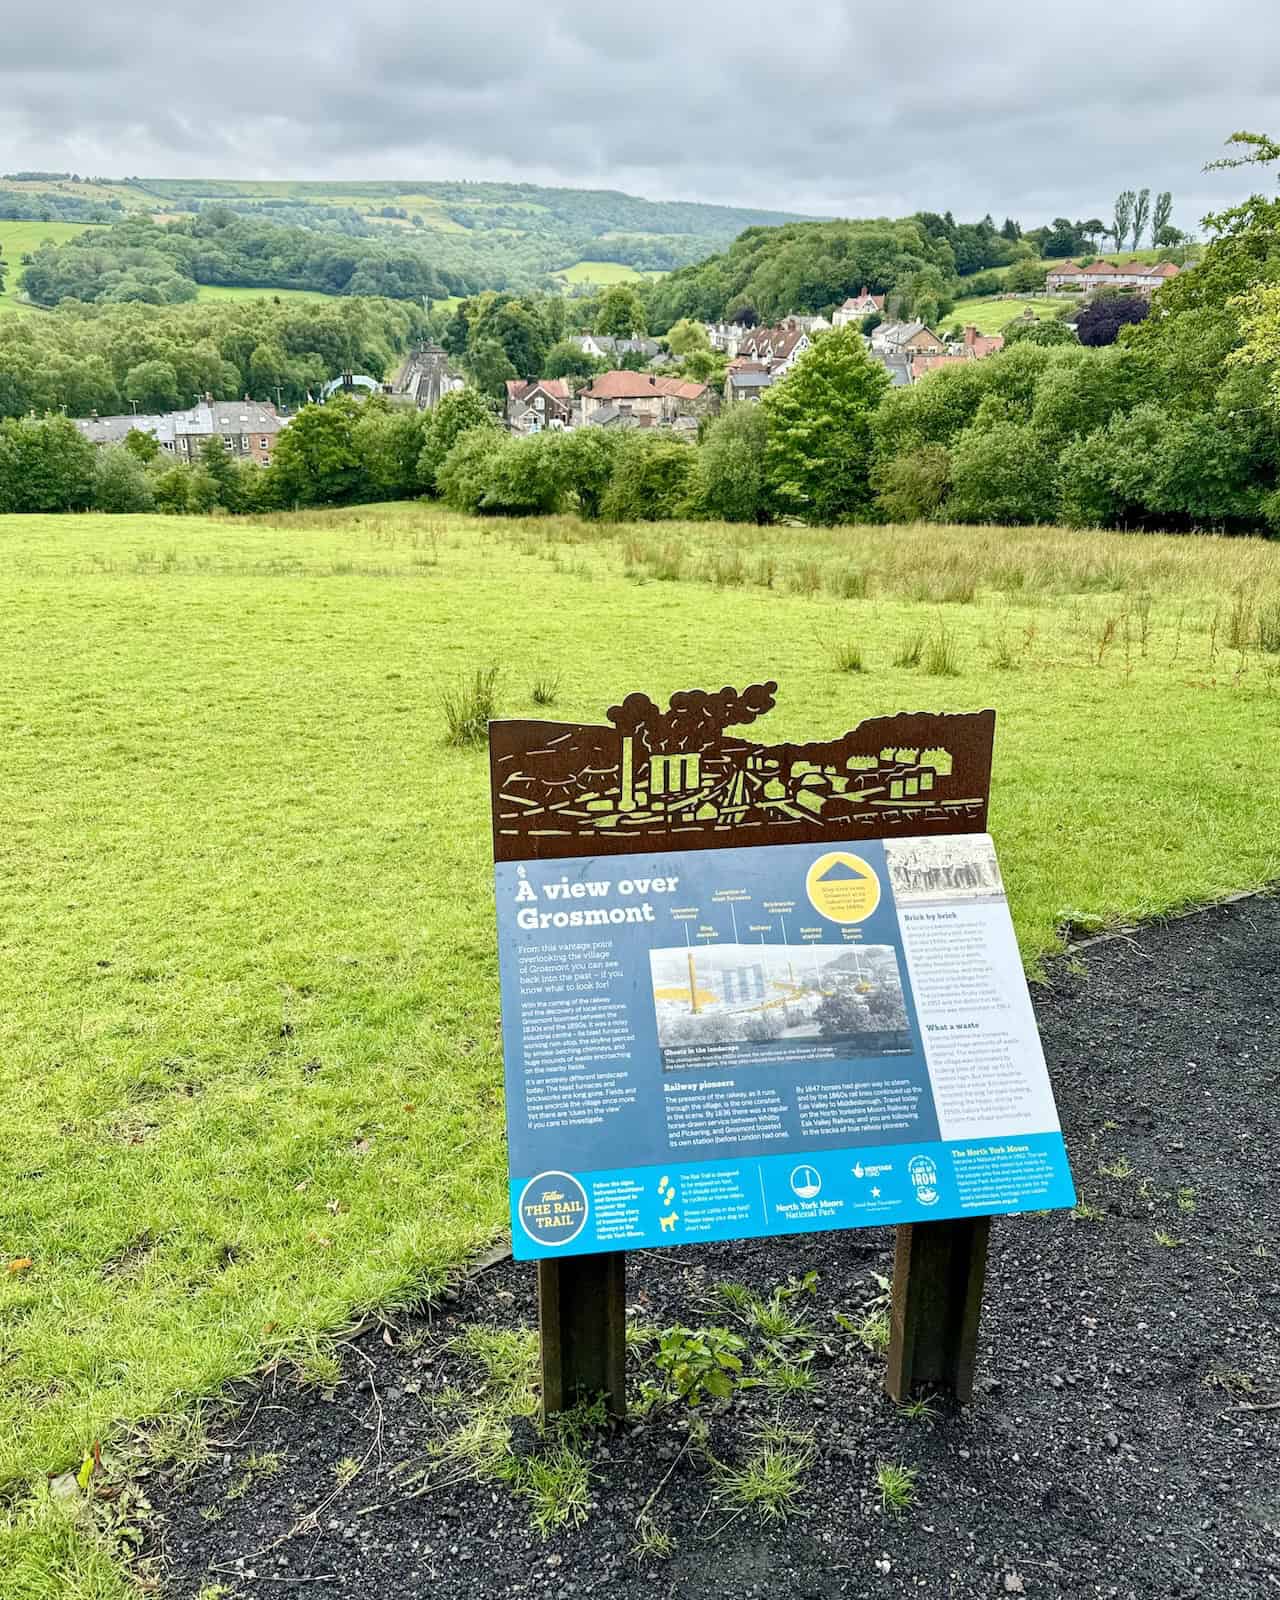 A viewing area at the top of the bank, overlooking Grosmont and featuring historical information about the ironworks on the Grosmont to Goathland walk.